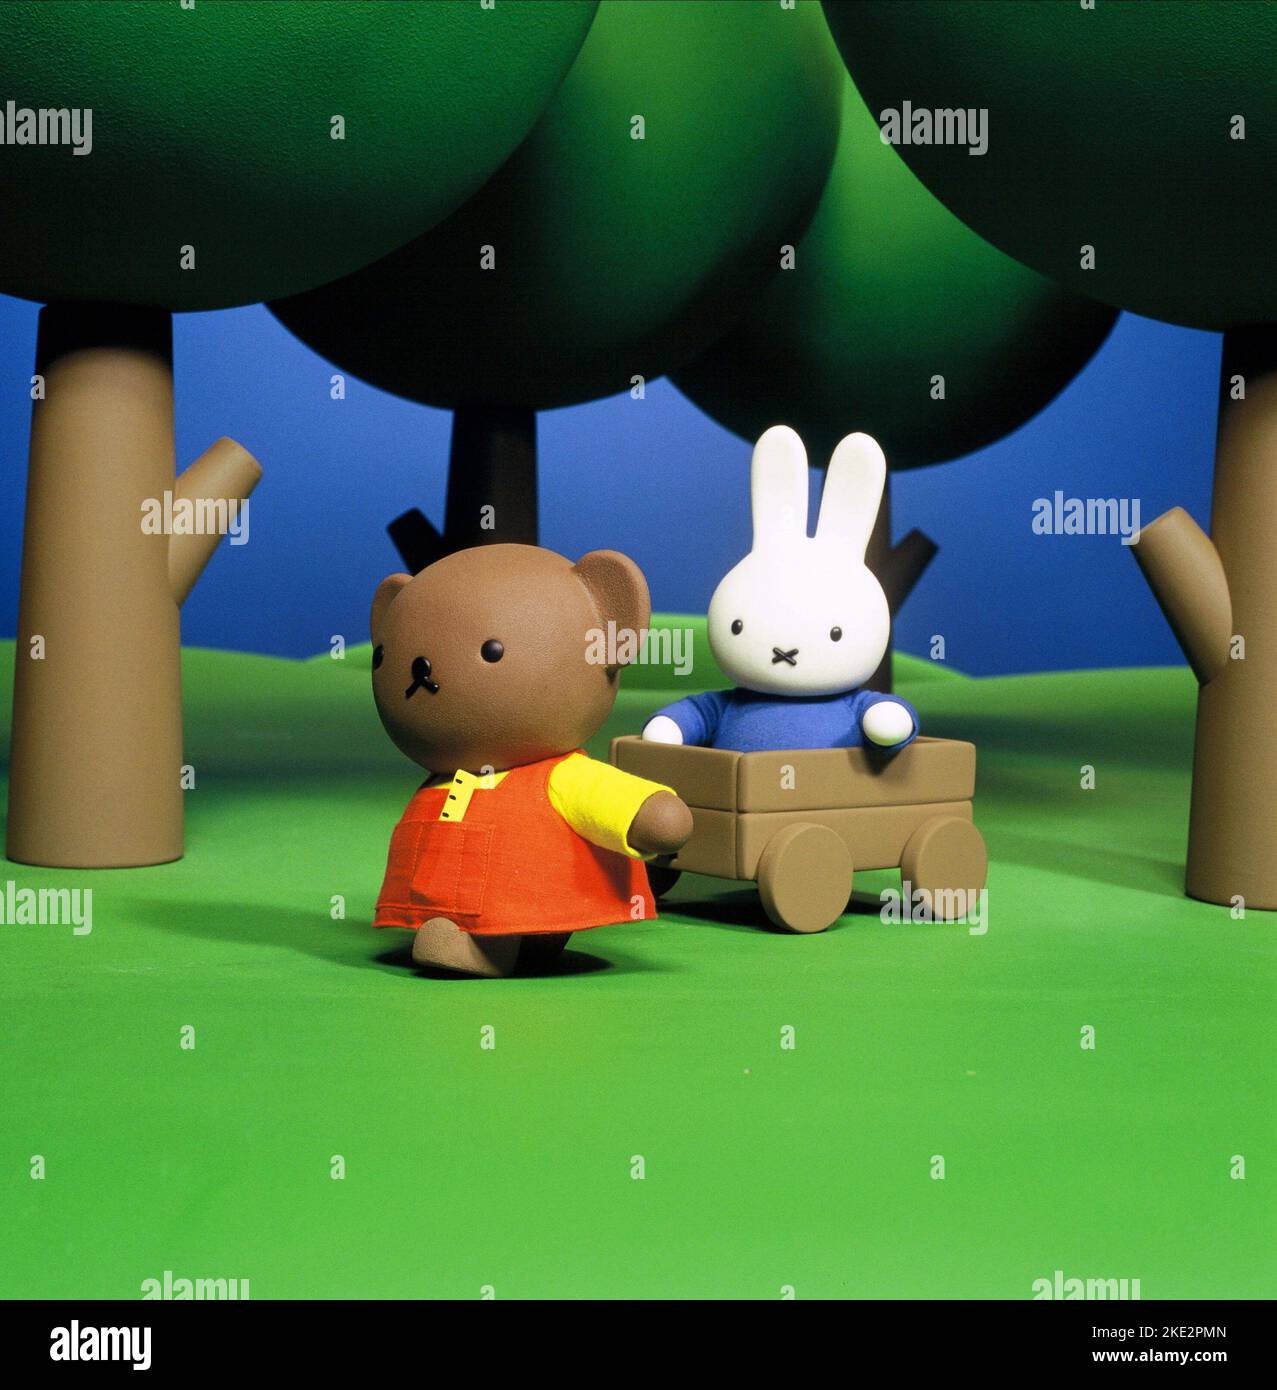 MIFFY ET SES AMIS, BARBARA BEAR, MIFFY, 2003 Banque D'Images